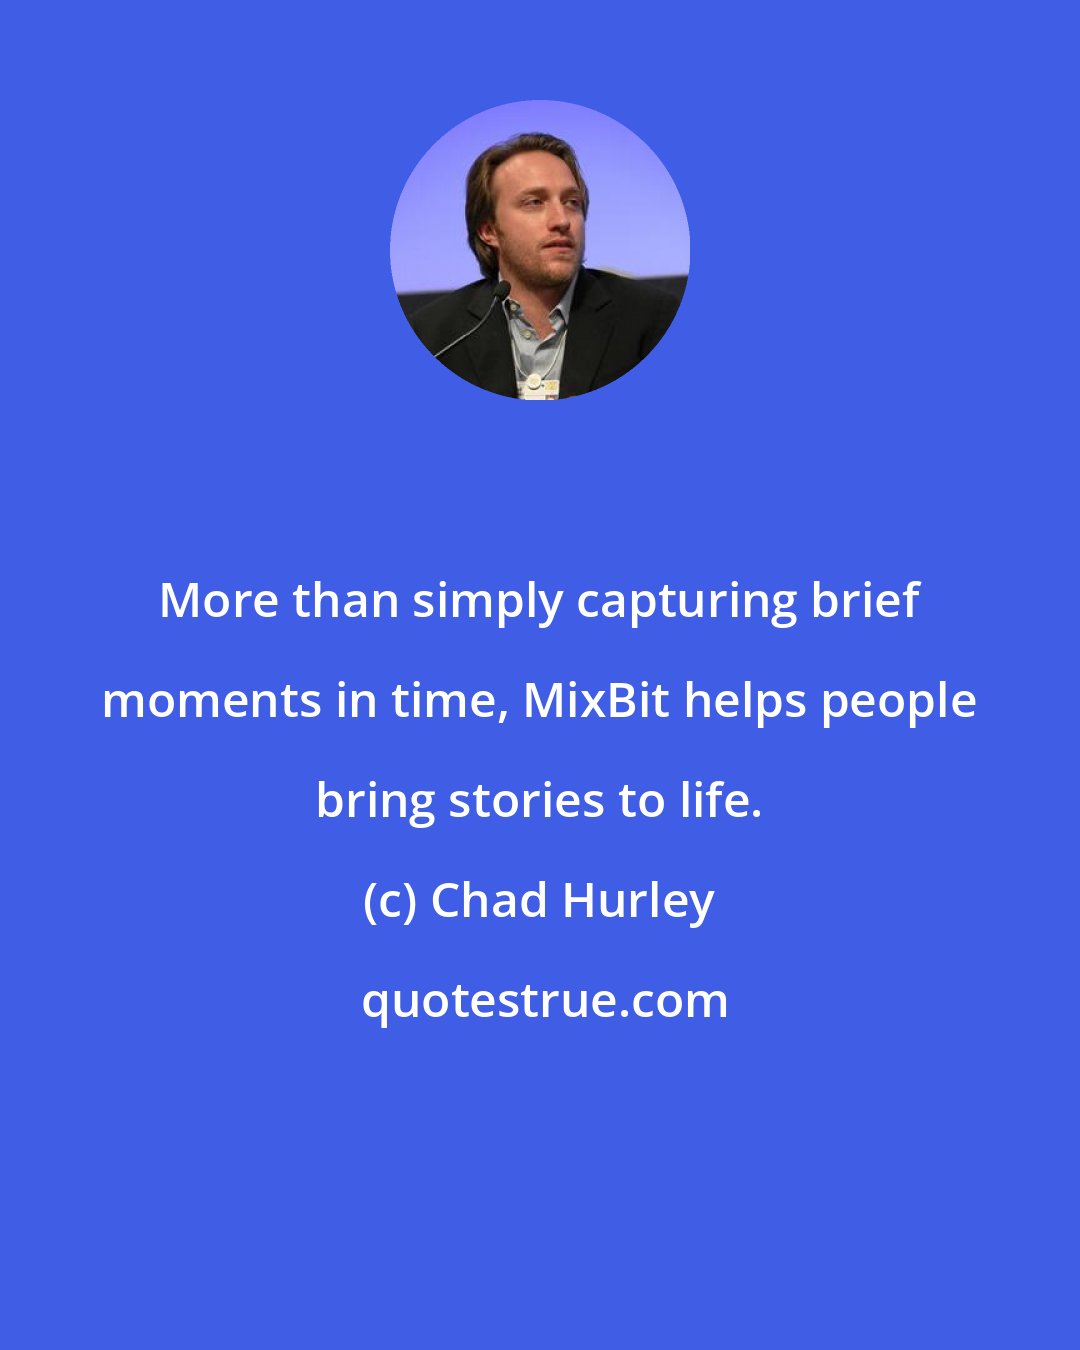 Chad Hurley: More than simply capturing brief moments in time, MixBit helps people bring stories to life.